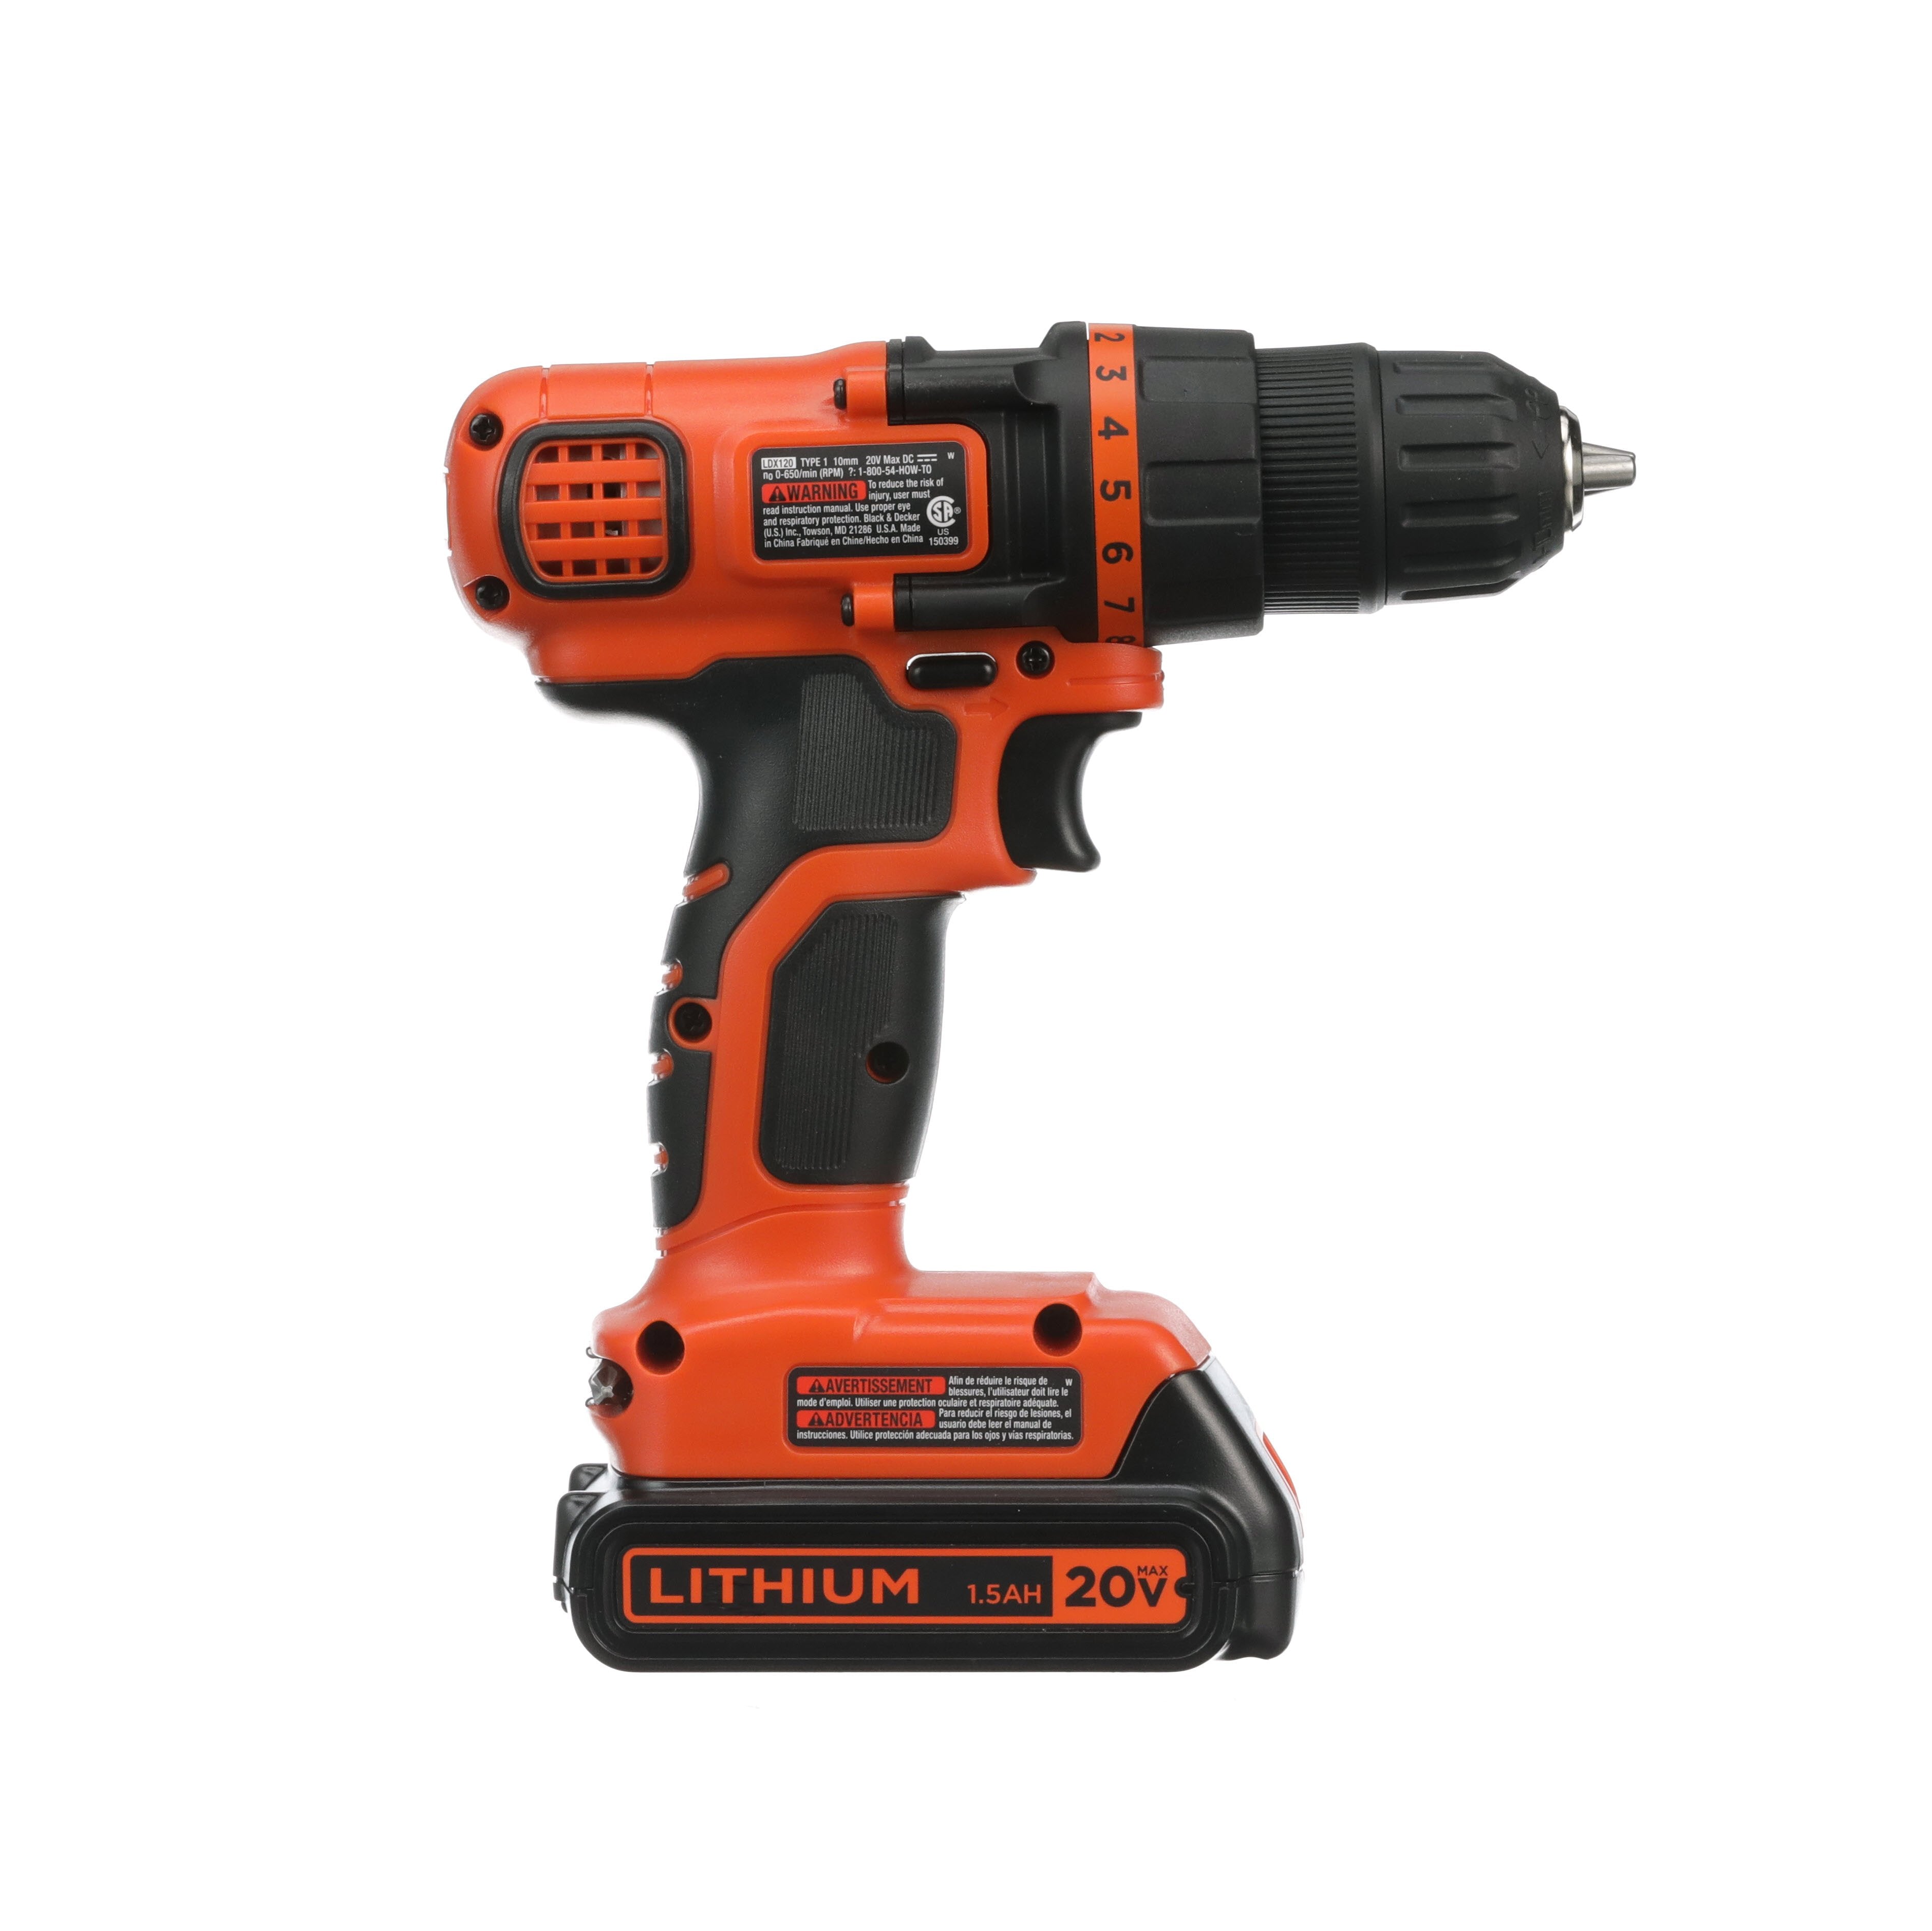 BLACK+DECKER BDINF20C 20V Lithium Cordless Multi-Purpose Inflator (Tool  Only) with BLACK+DECKER LDX120C 20V MAX Lithium Ion Drill / Driver